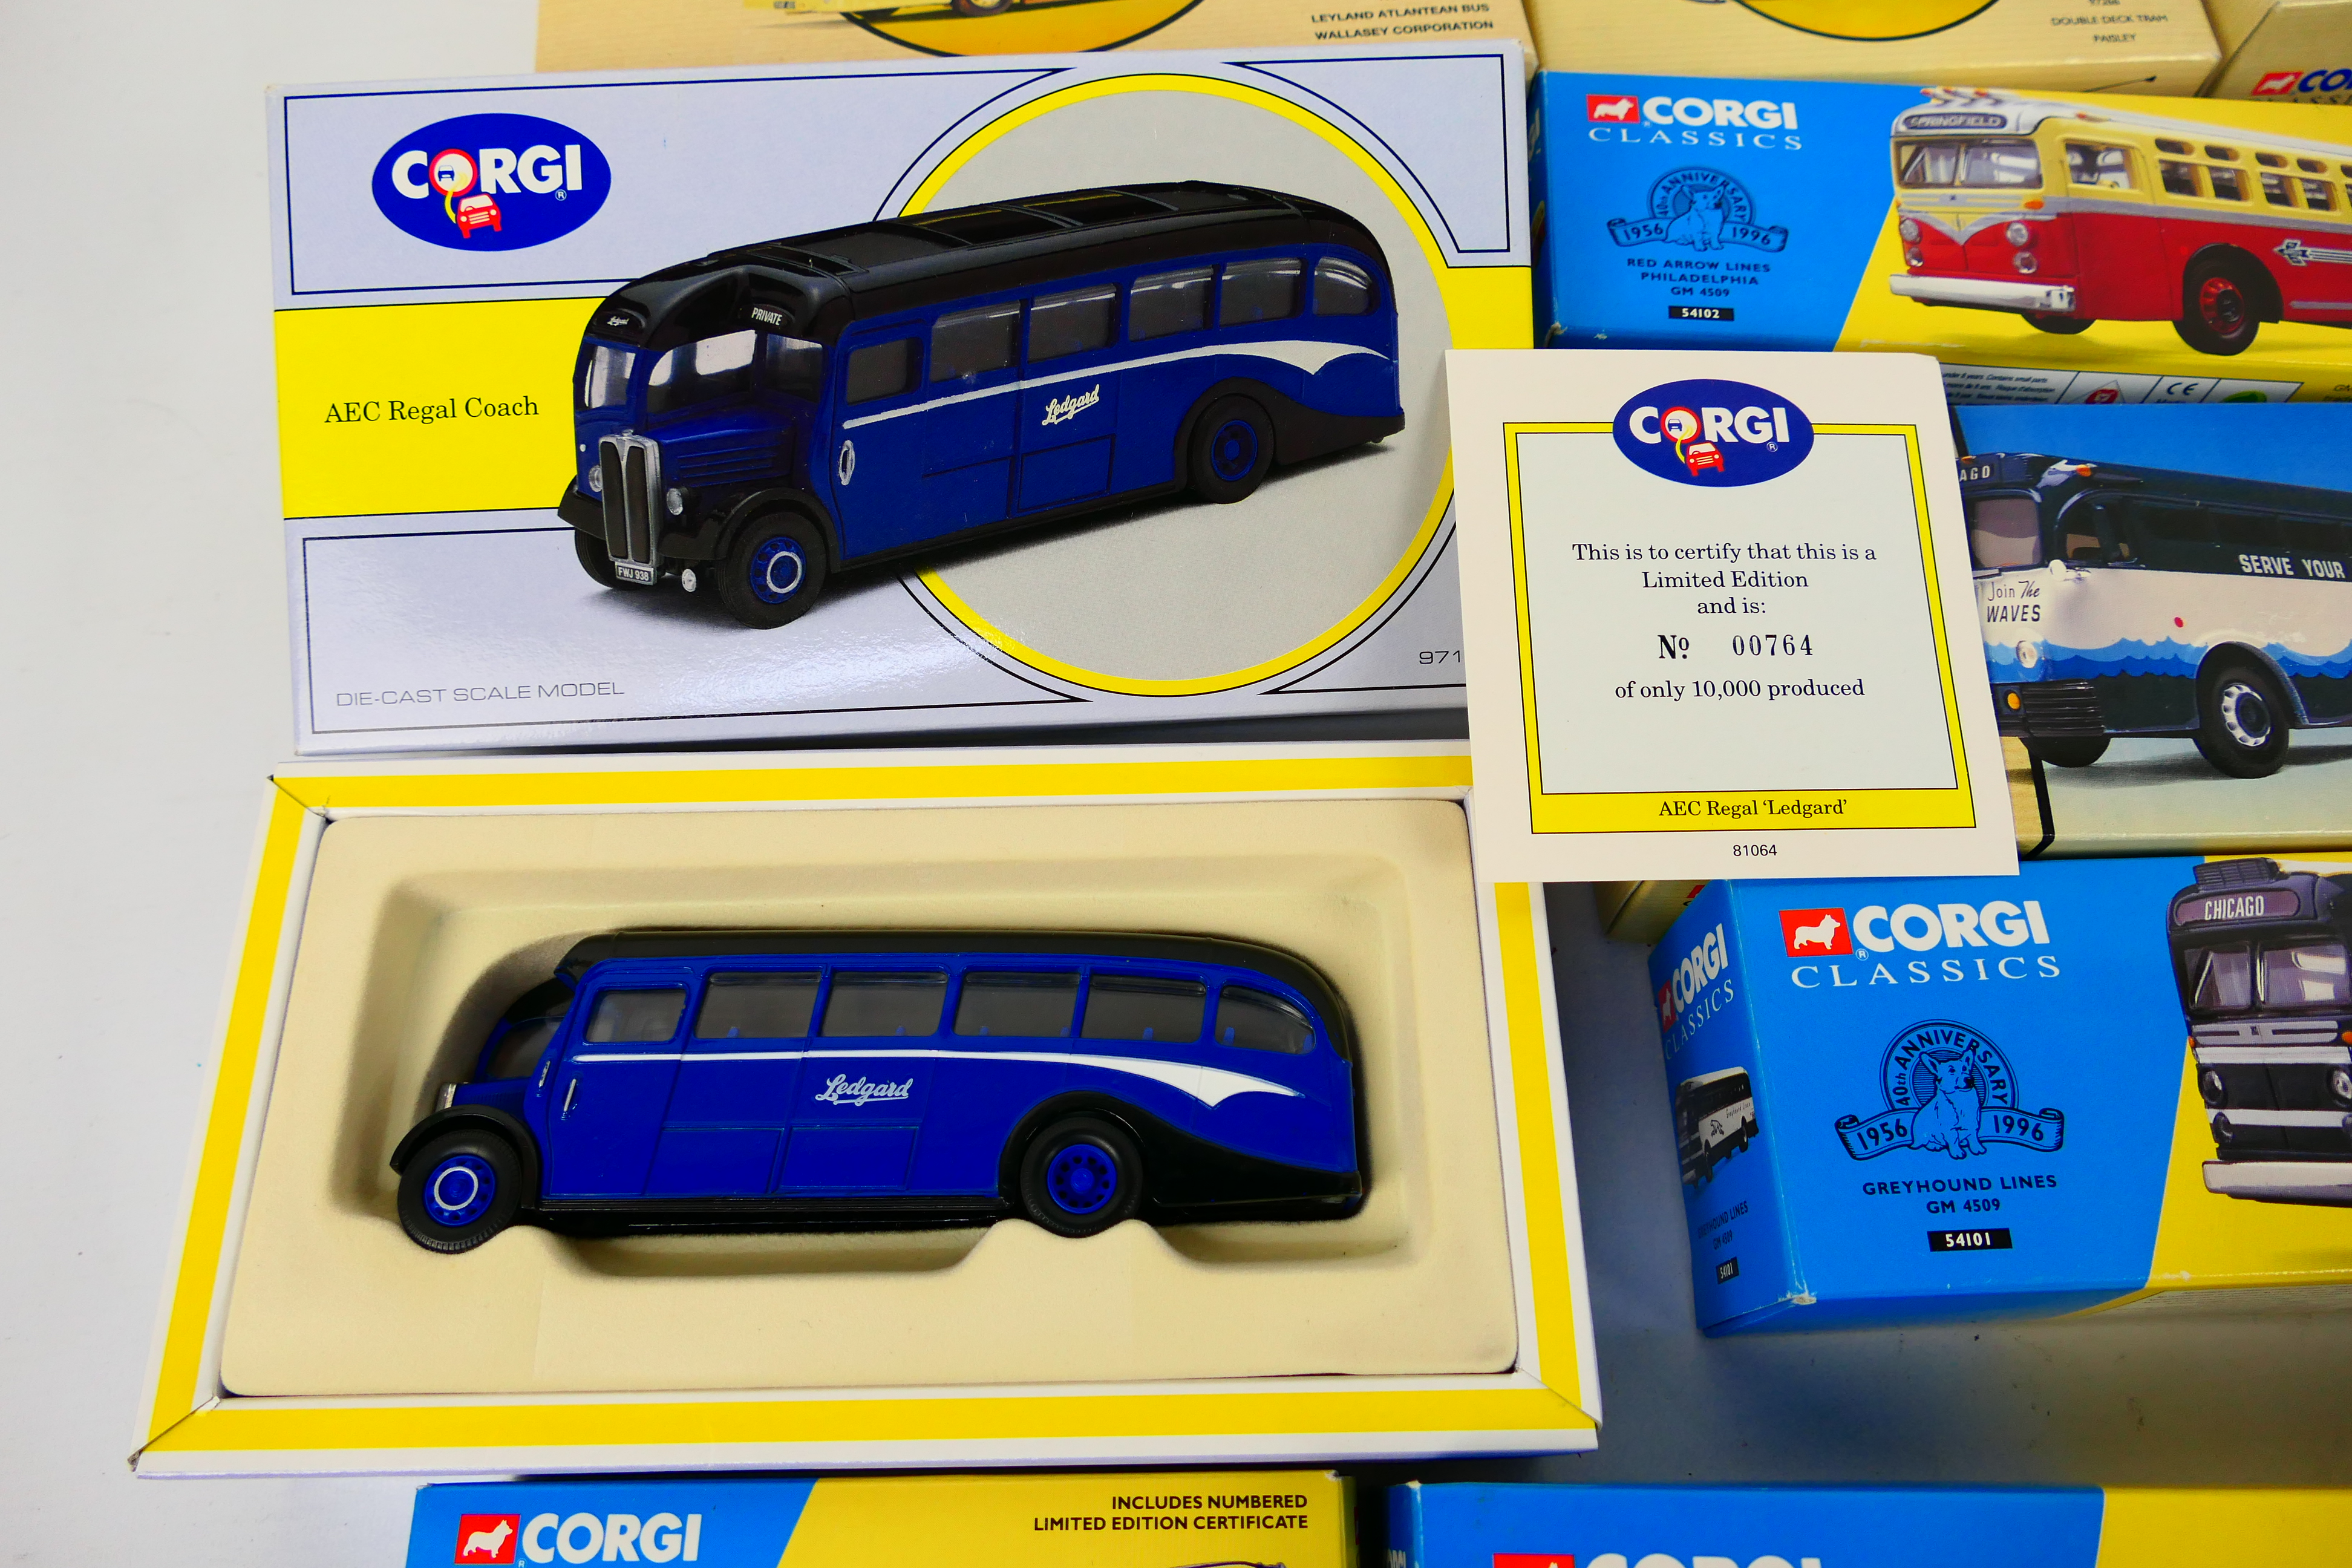 Corgi Classics - 13 boxed diecast model buses and trams from various Corgi ranges, - Image 4 of 4